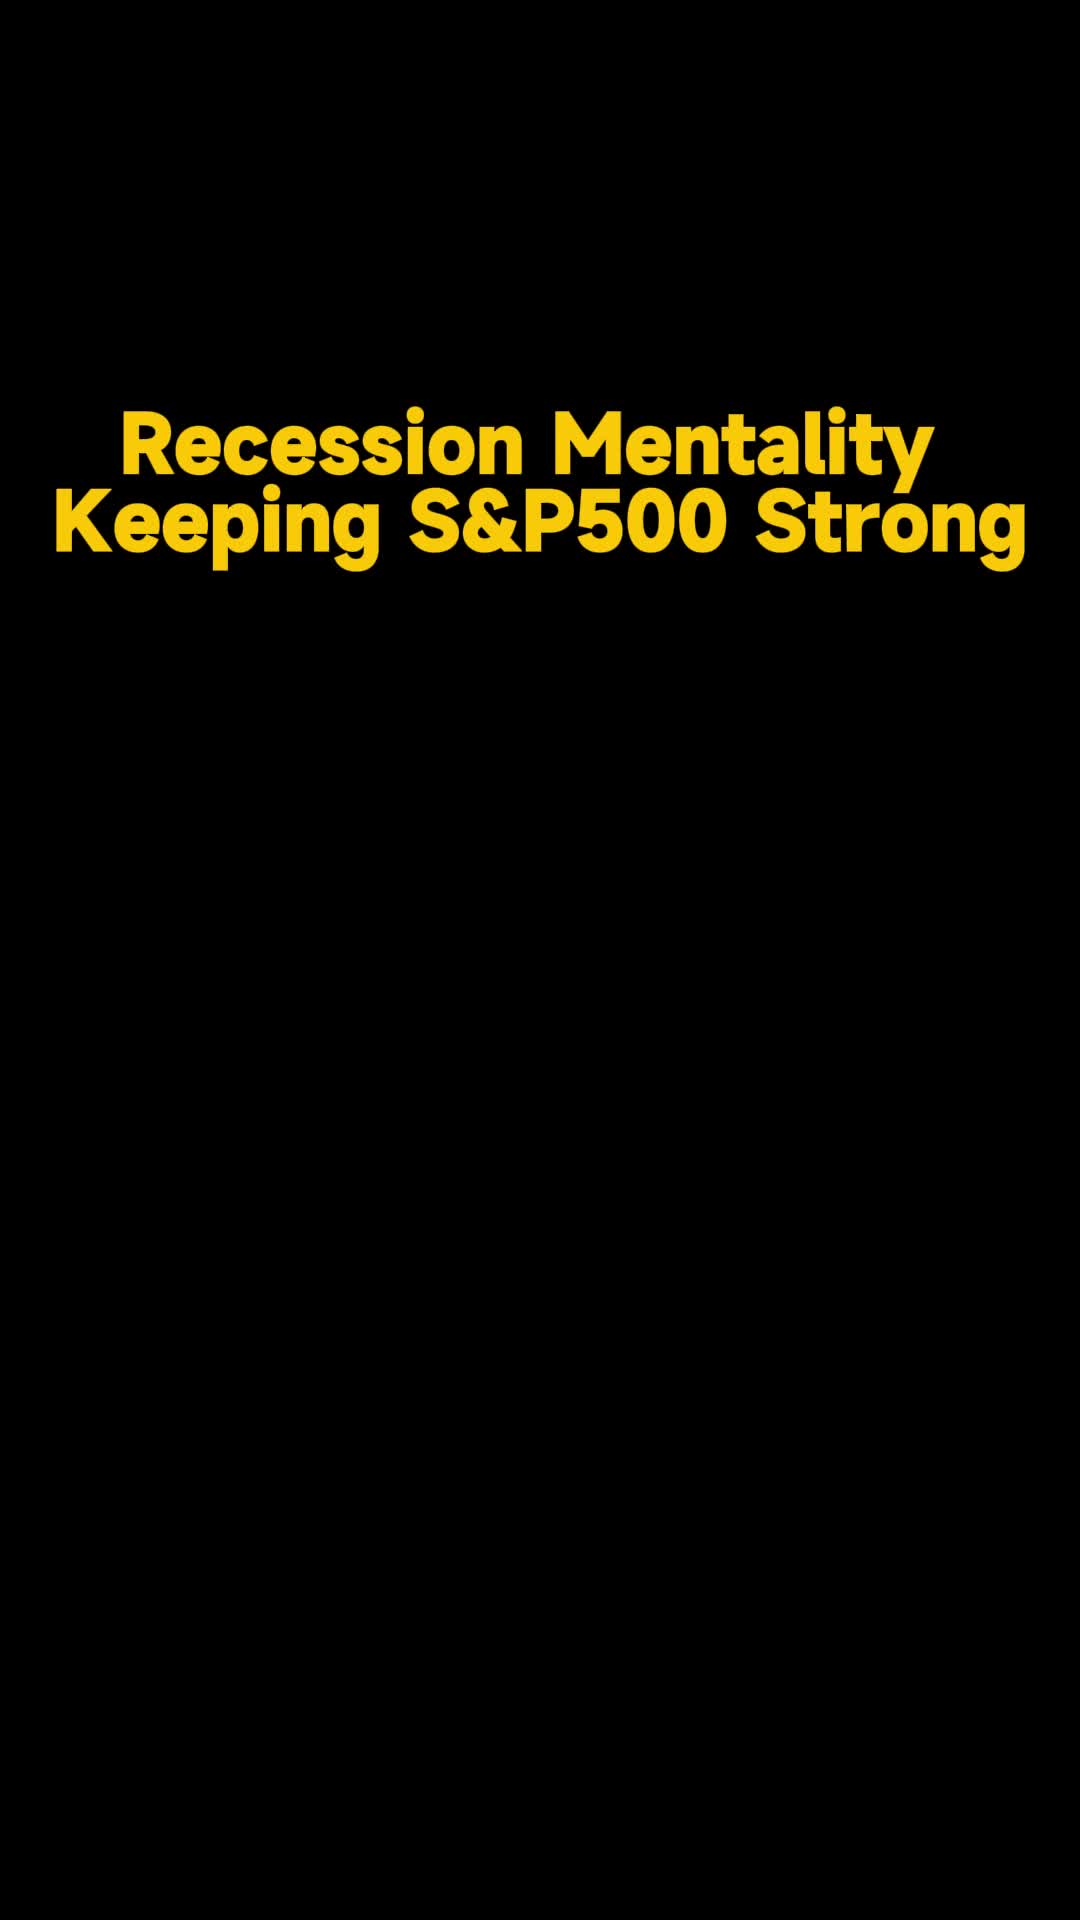 Recession Mentality Keeping S&P500 Strong